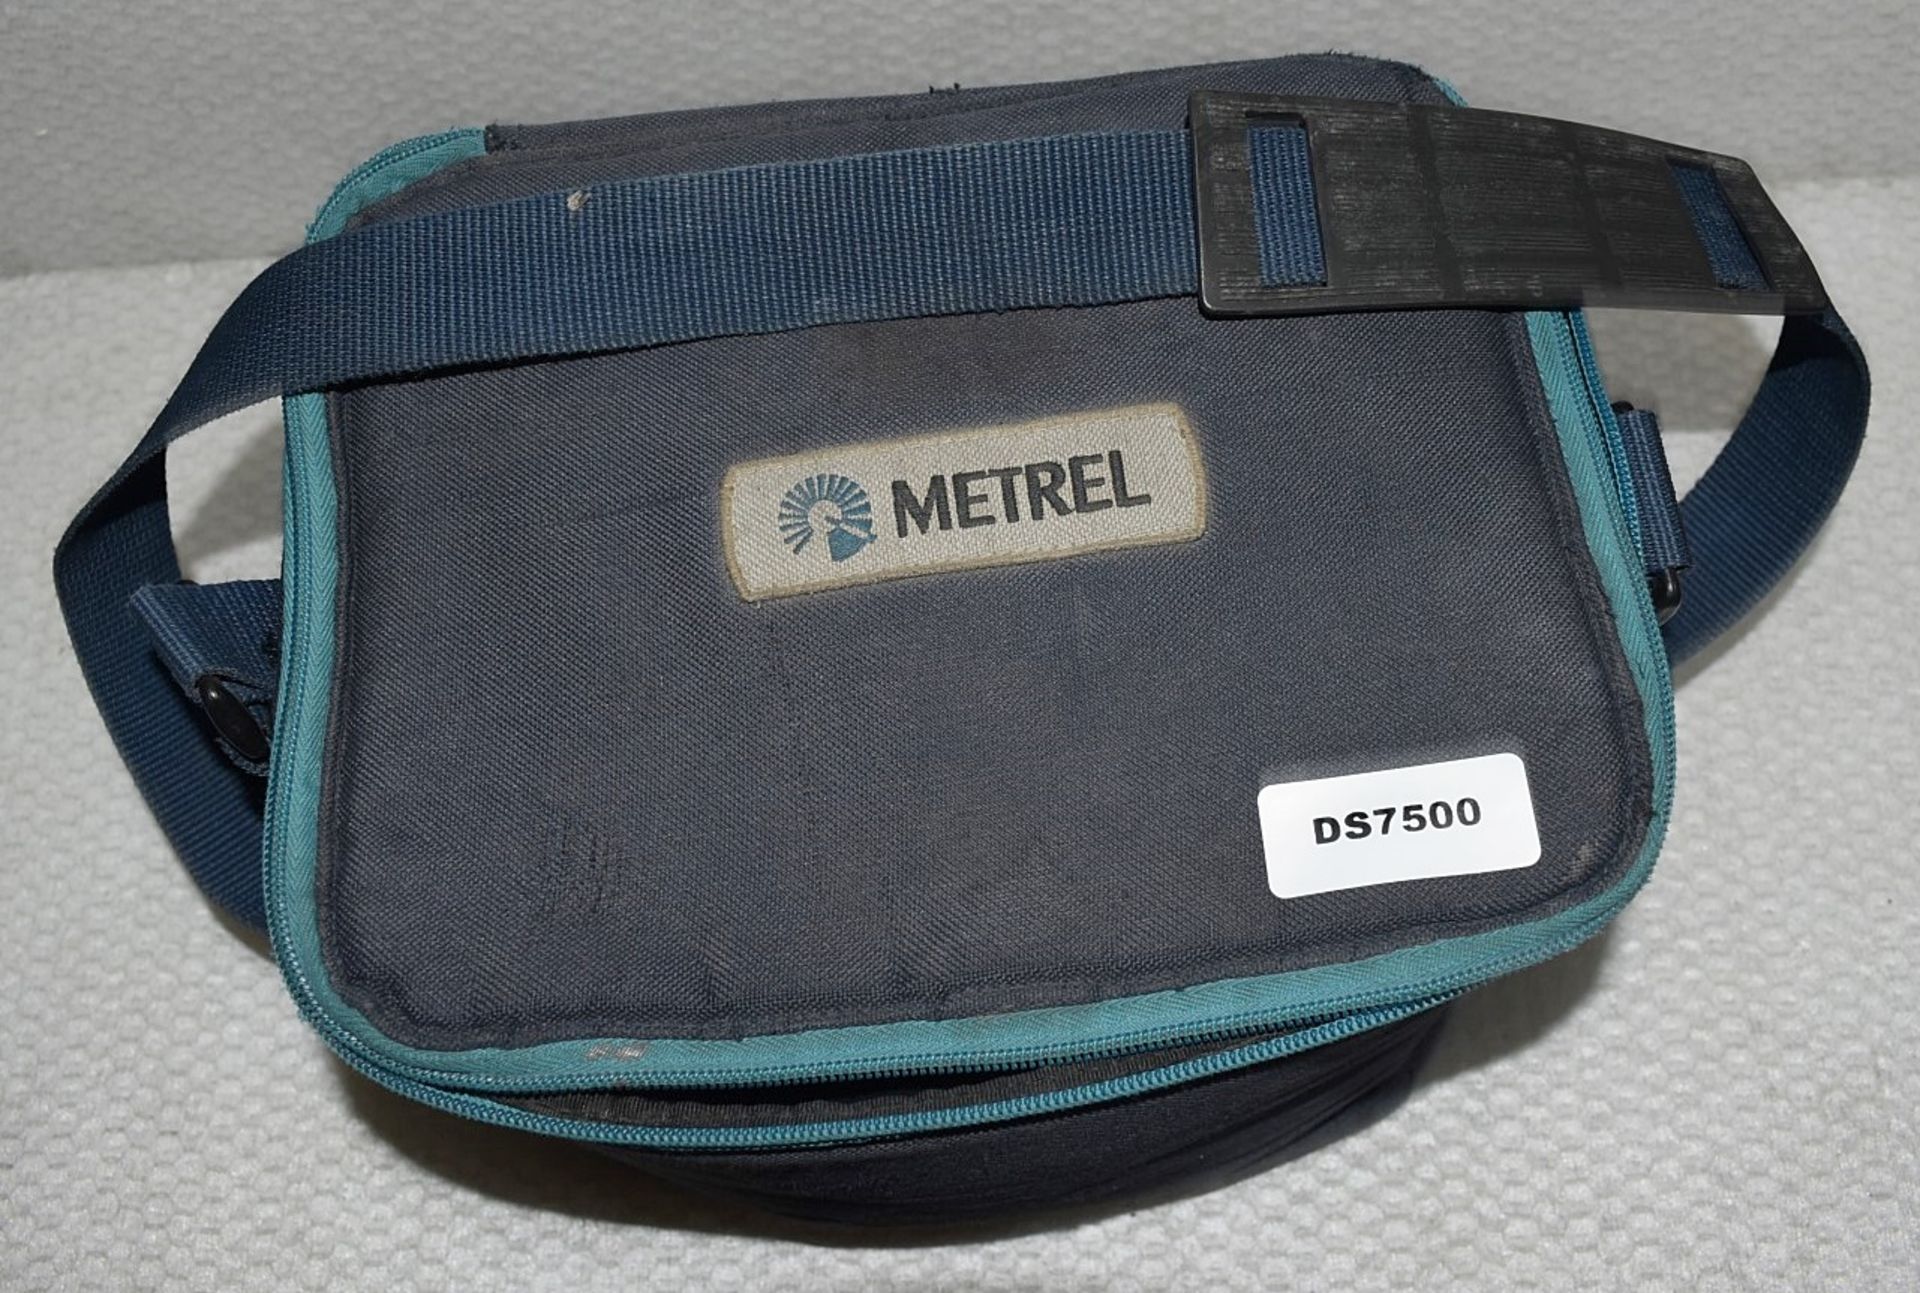 1 x METREL Easitest Multifunctional Portable Electrical Tester With Carry Case - Ref: DS7500 ALT - - Image 7 of 8